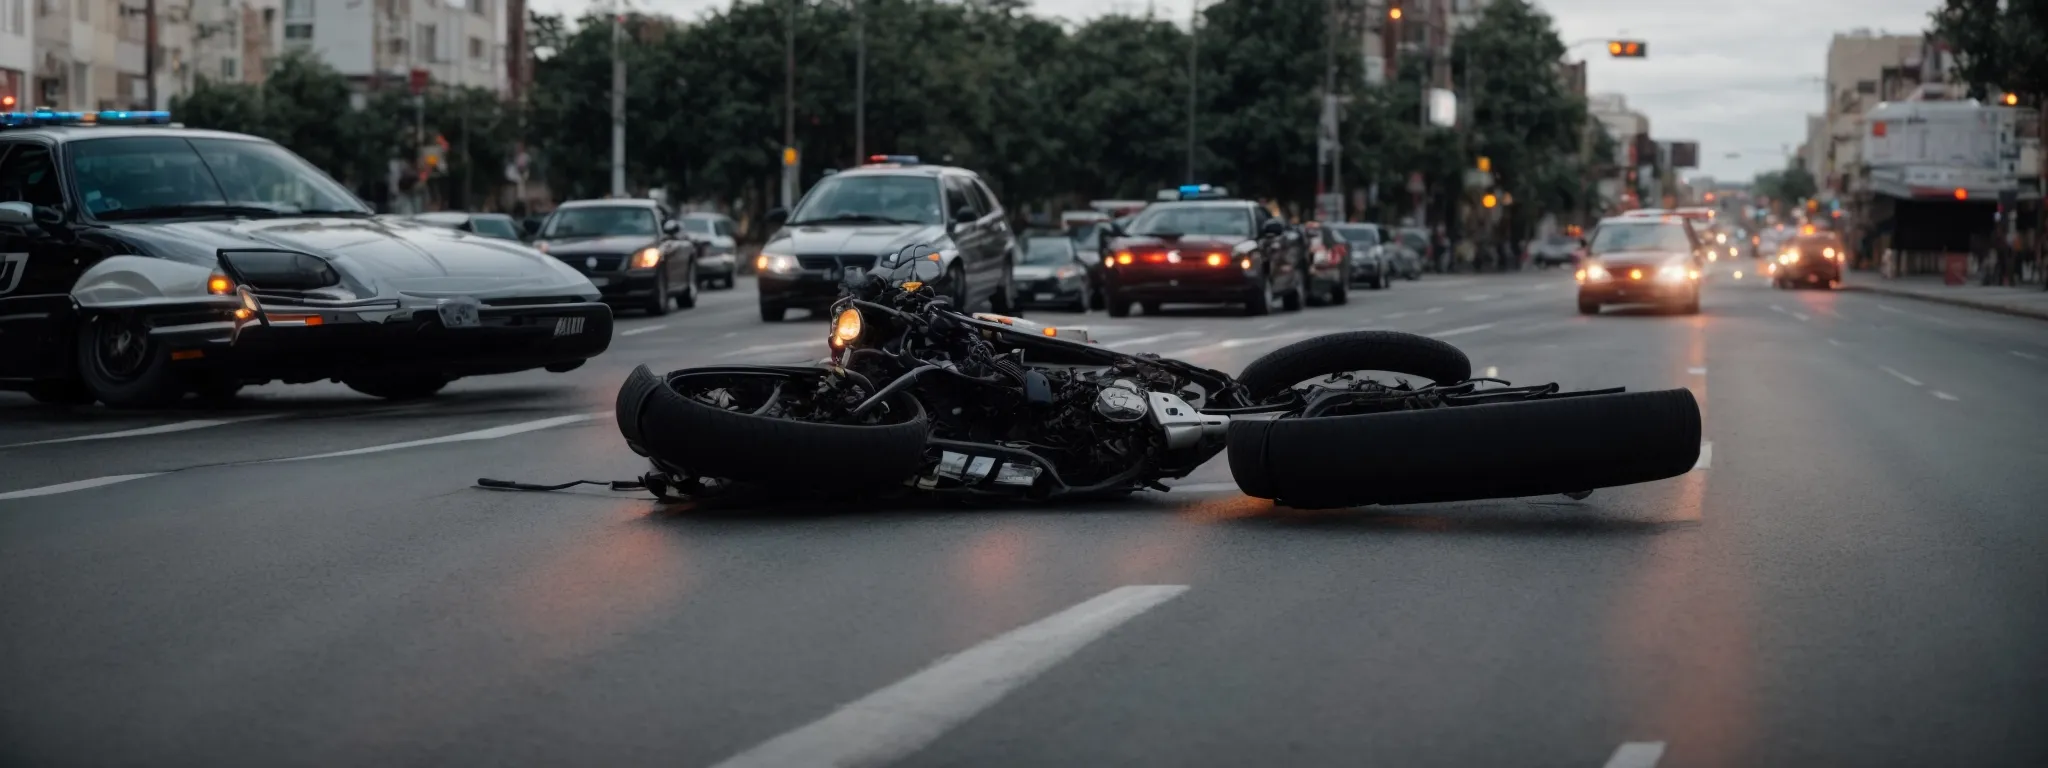 a motorcycle lies on its side near a traffic intersection while a police car with flashing lights blocks the road.